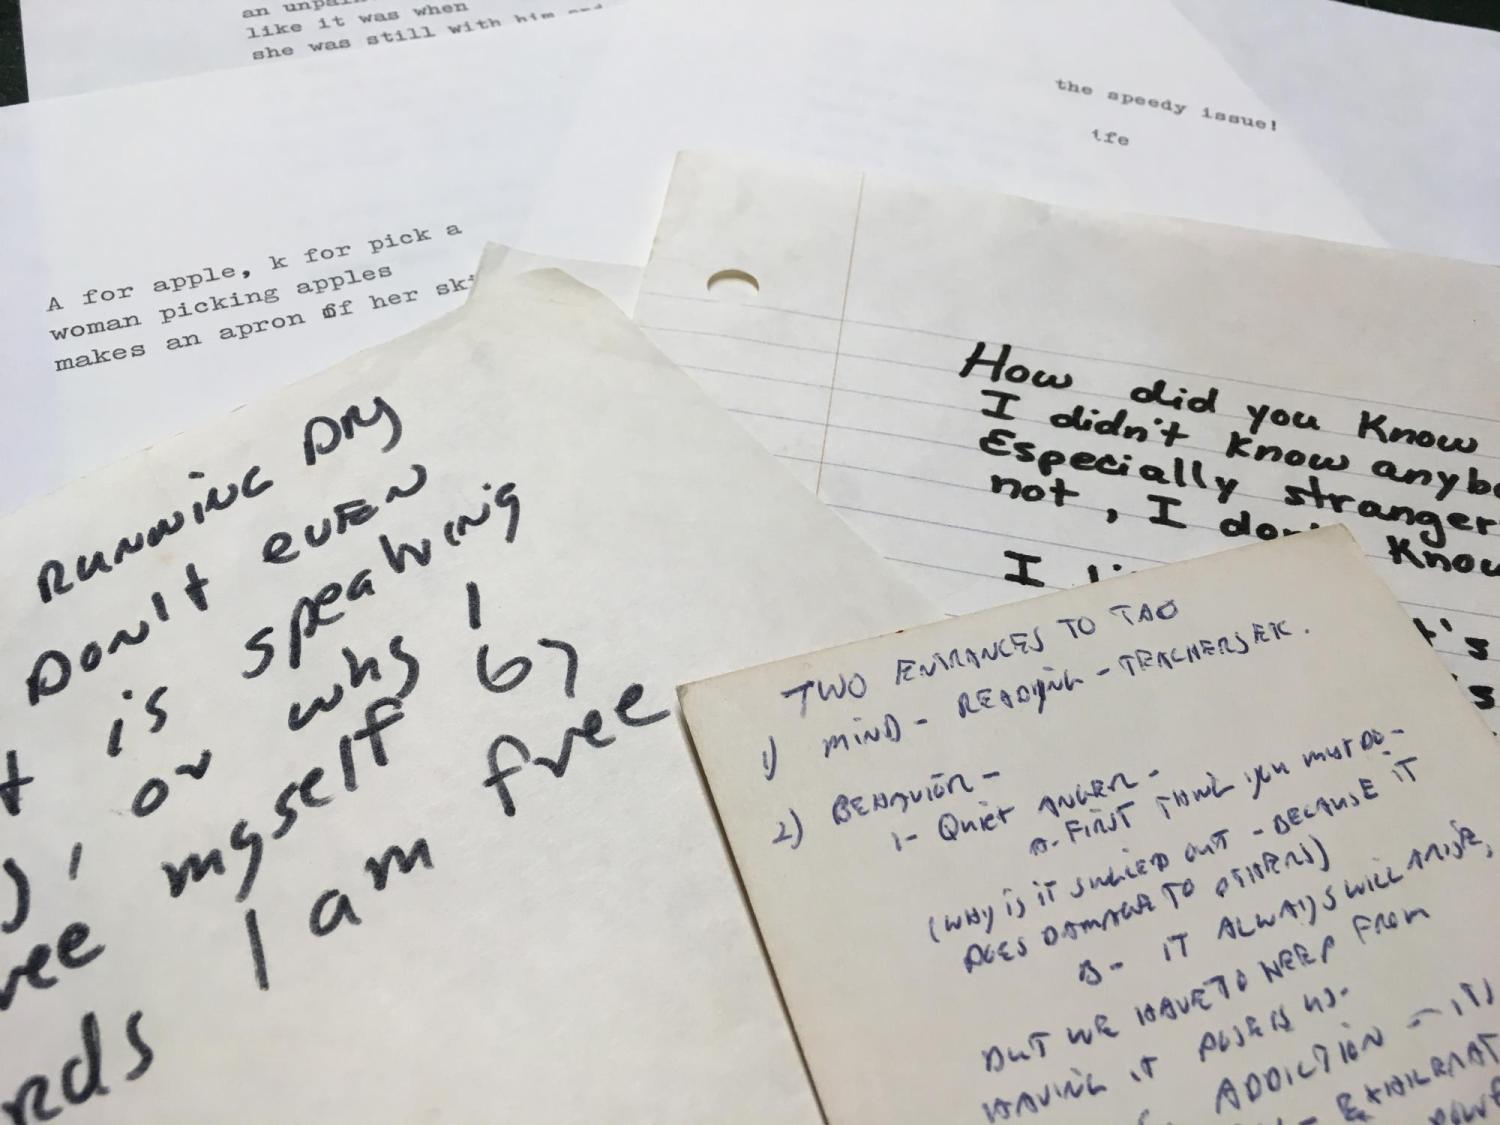 Handwritten notes from the Alan Lew collection.